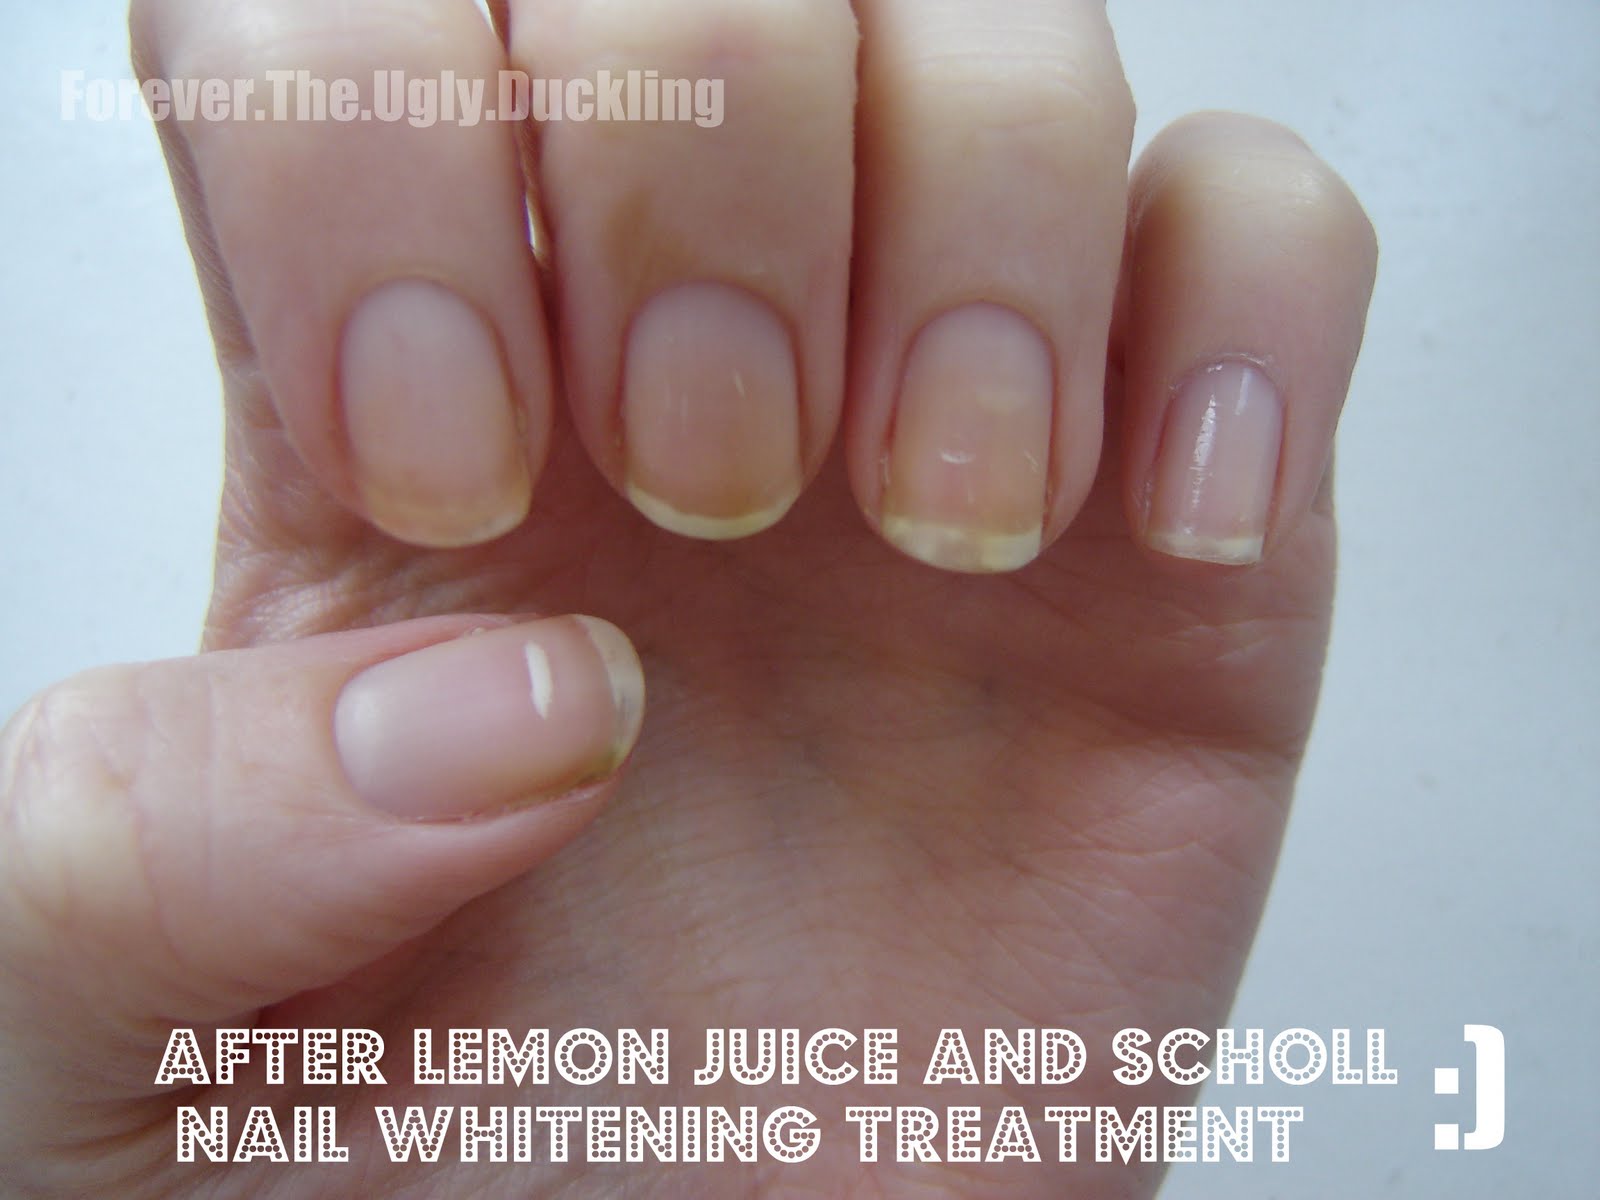 Here is my nails after 5 days of treatment with both the lemon juice and